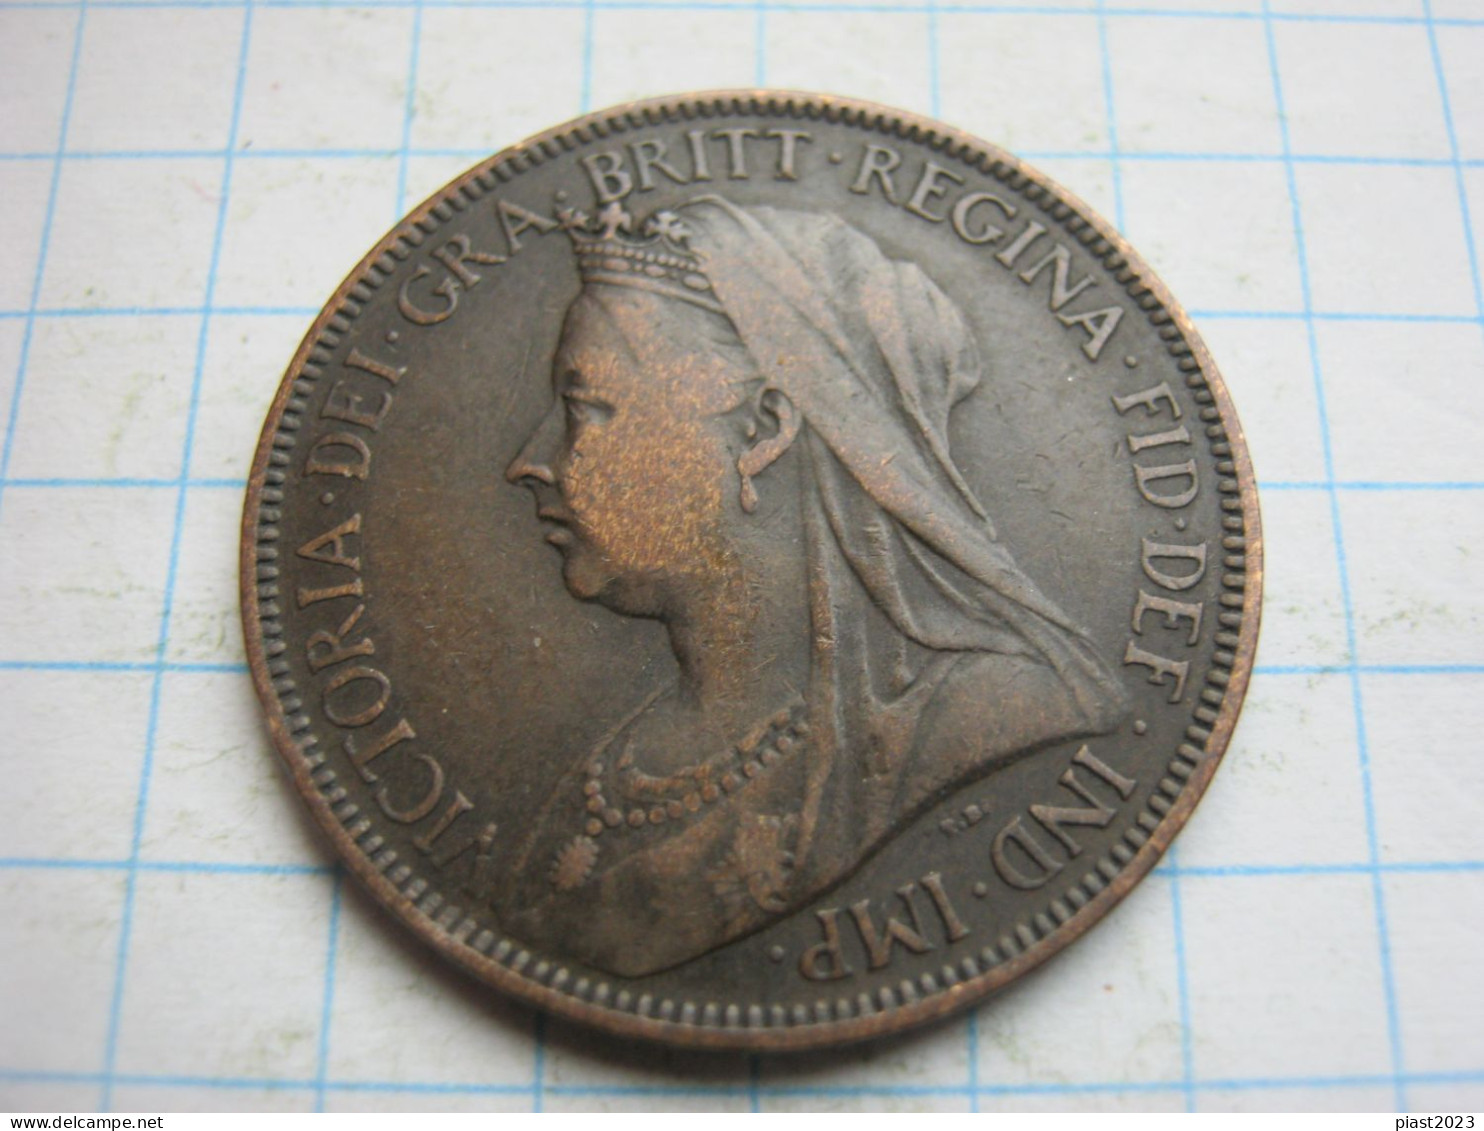 Great Britain 1/2 Penny 1900 - C. 1/2 Penny